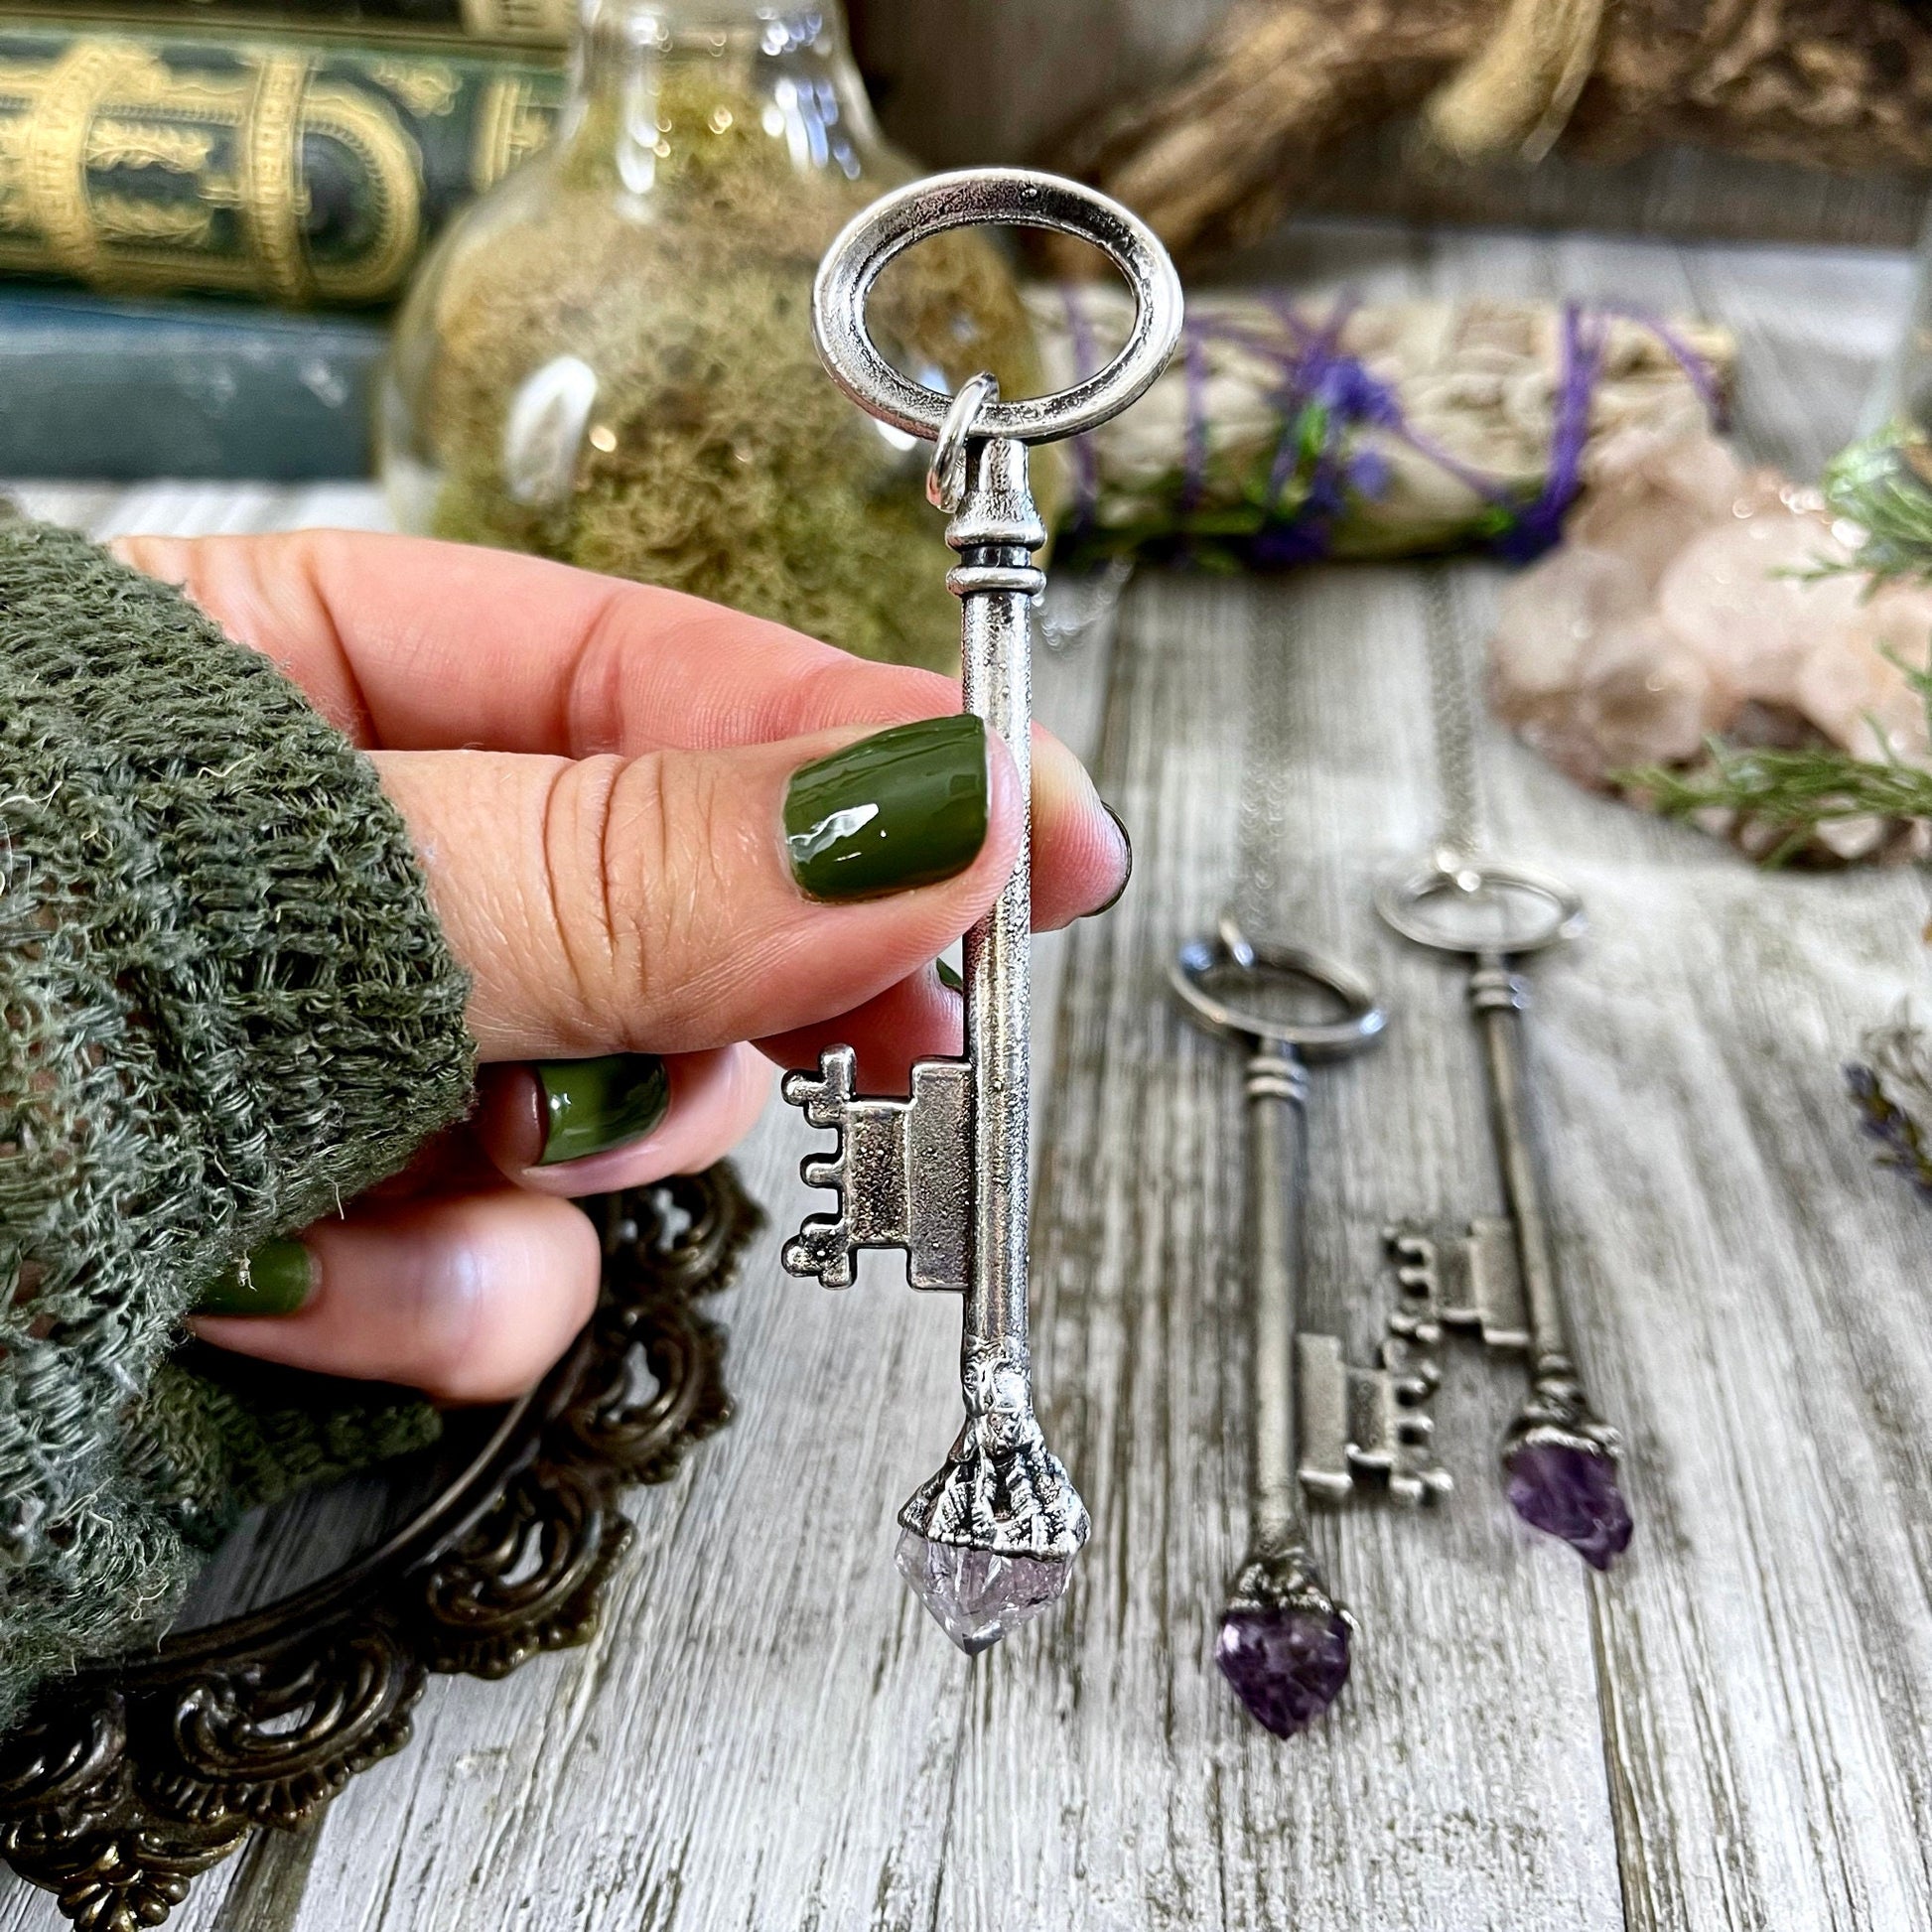 antique key necklace, Crystal Necklaces, Etsy ID: 1119611011, FOXLARK- NECKLACES, Gothic Jewelry, Jewelry, Necklaces, Raw Amethyst Jewelry, raw crystal jewelry, Raw crystal necklace, Raw Crystal Pendant, Raw Stone Jewelry, Skeleton Key, Steampunk Jewelry,